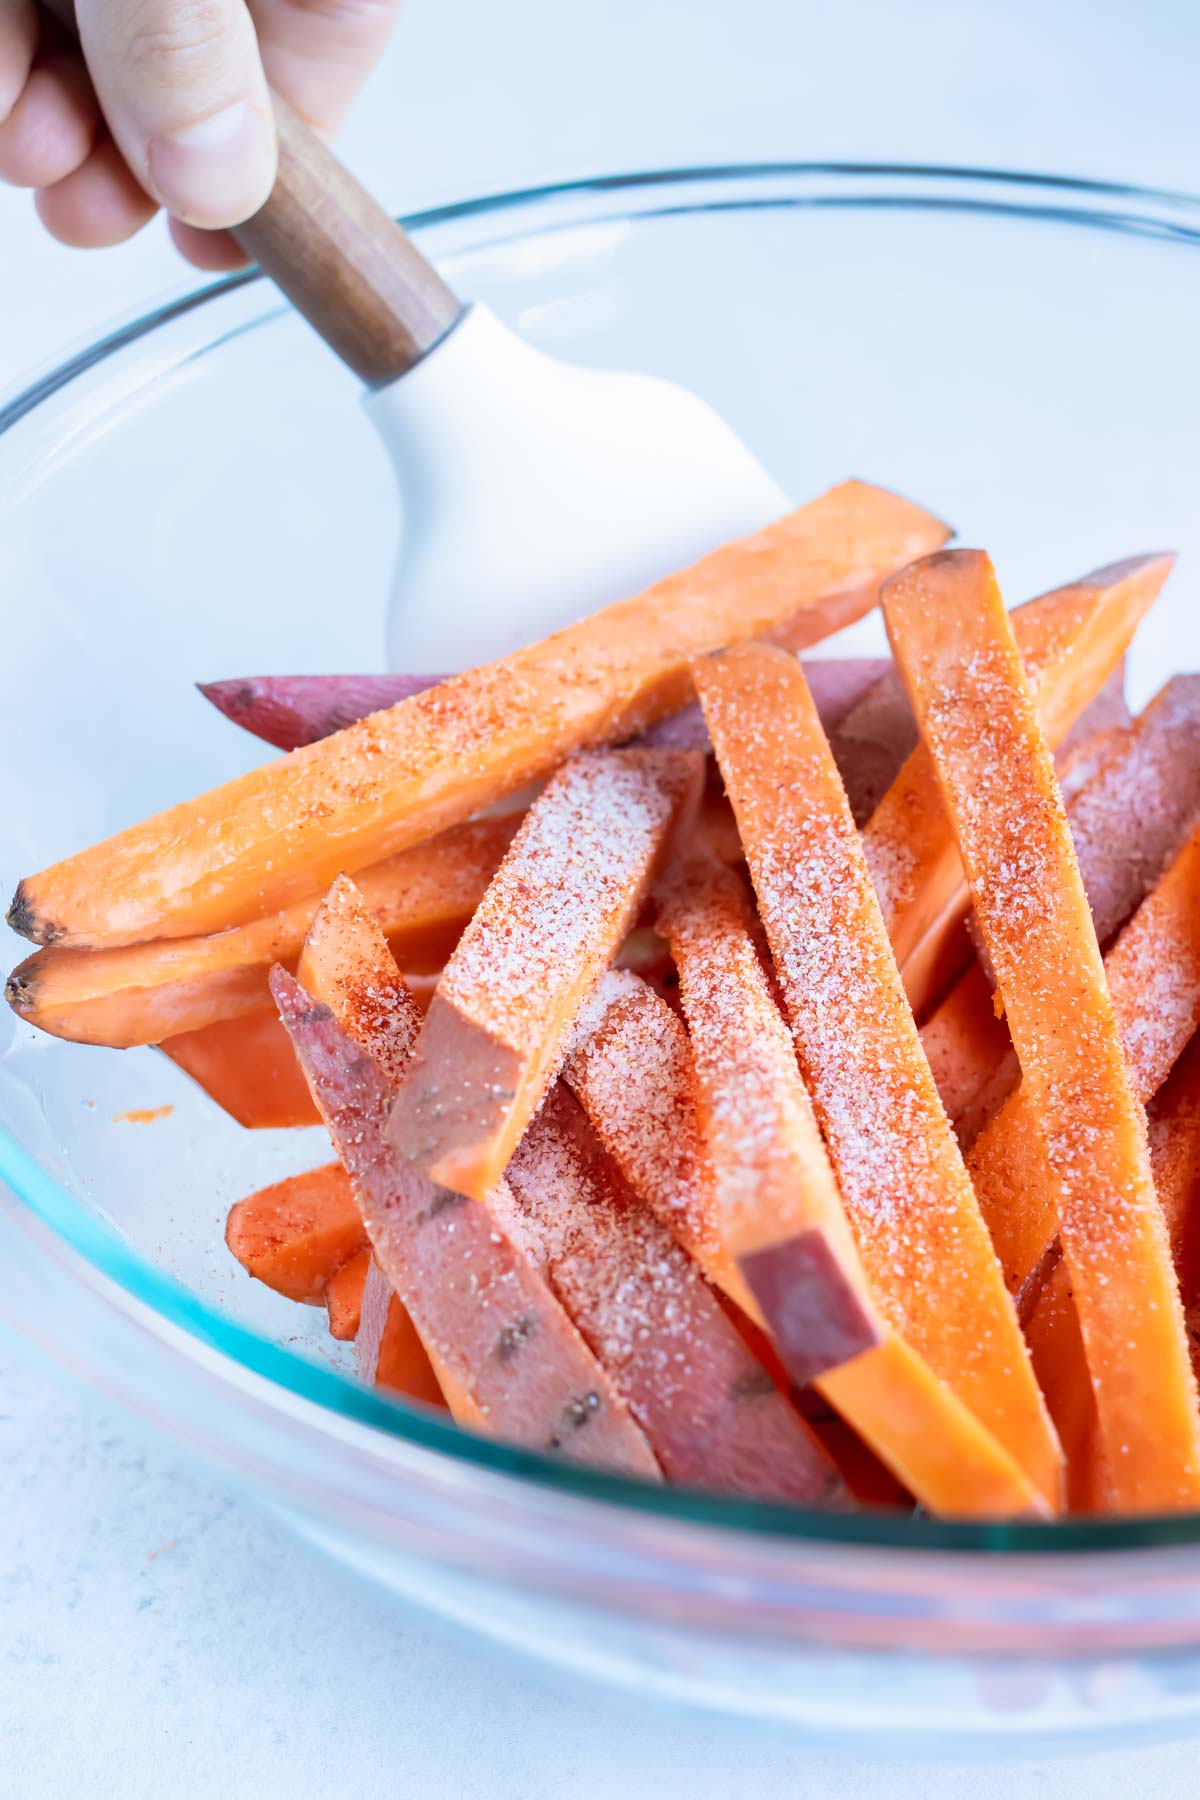 Salt, pepper, and seasonings are added to the sweet potatoes.